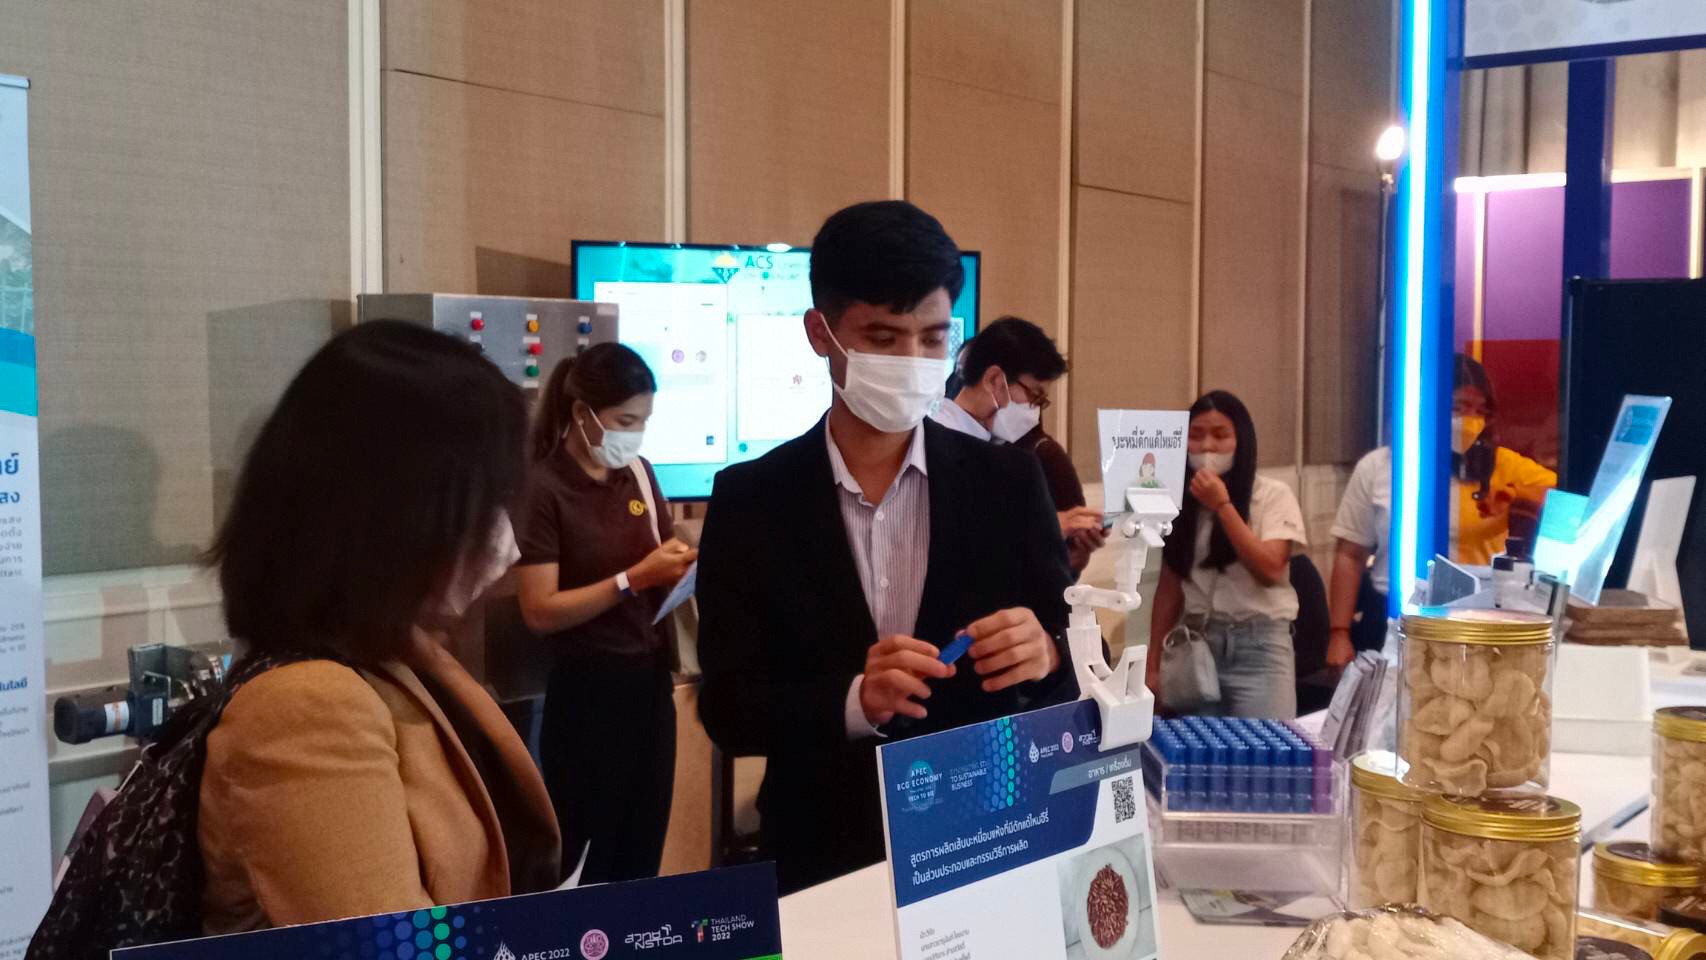 CEST@APEC BCG Economy Thailand 2022 Our team Mr. Surasak Kaenket is busy showing our energy storage technology (VISBAT) at APEC BCG Economy Thailand 2022: Tech to Biz” at Centara Grand at Central Ladprao on 10-12 October 2022